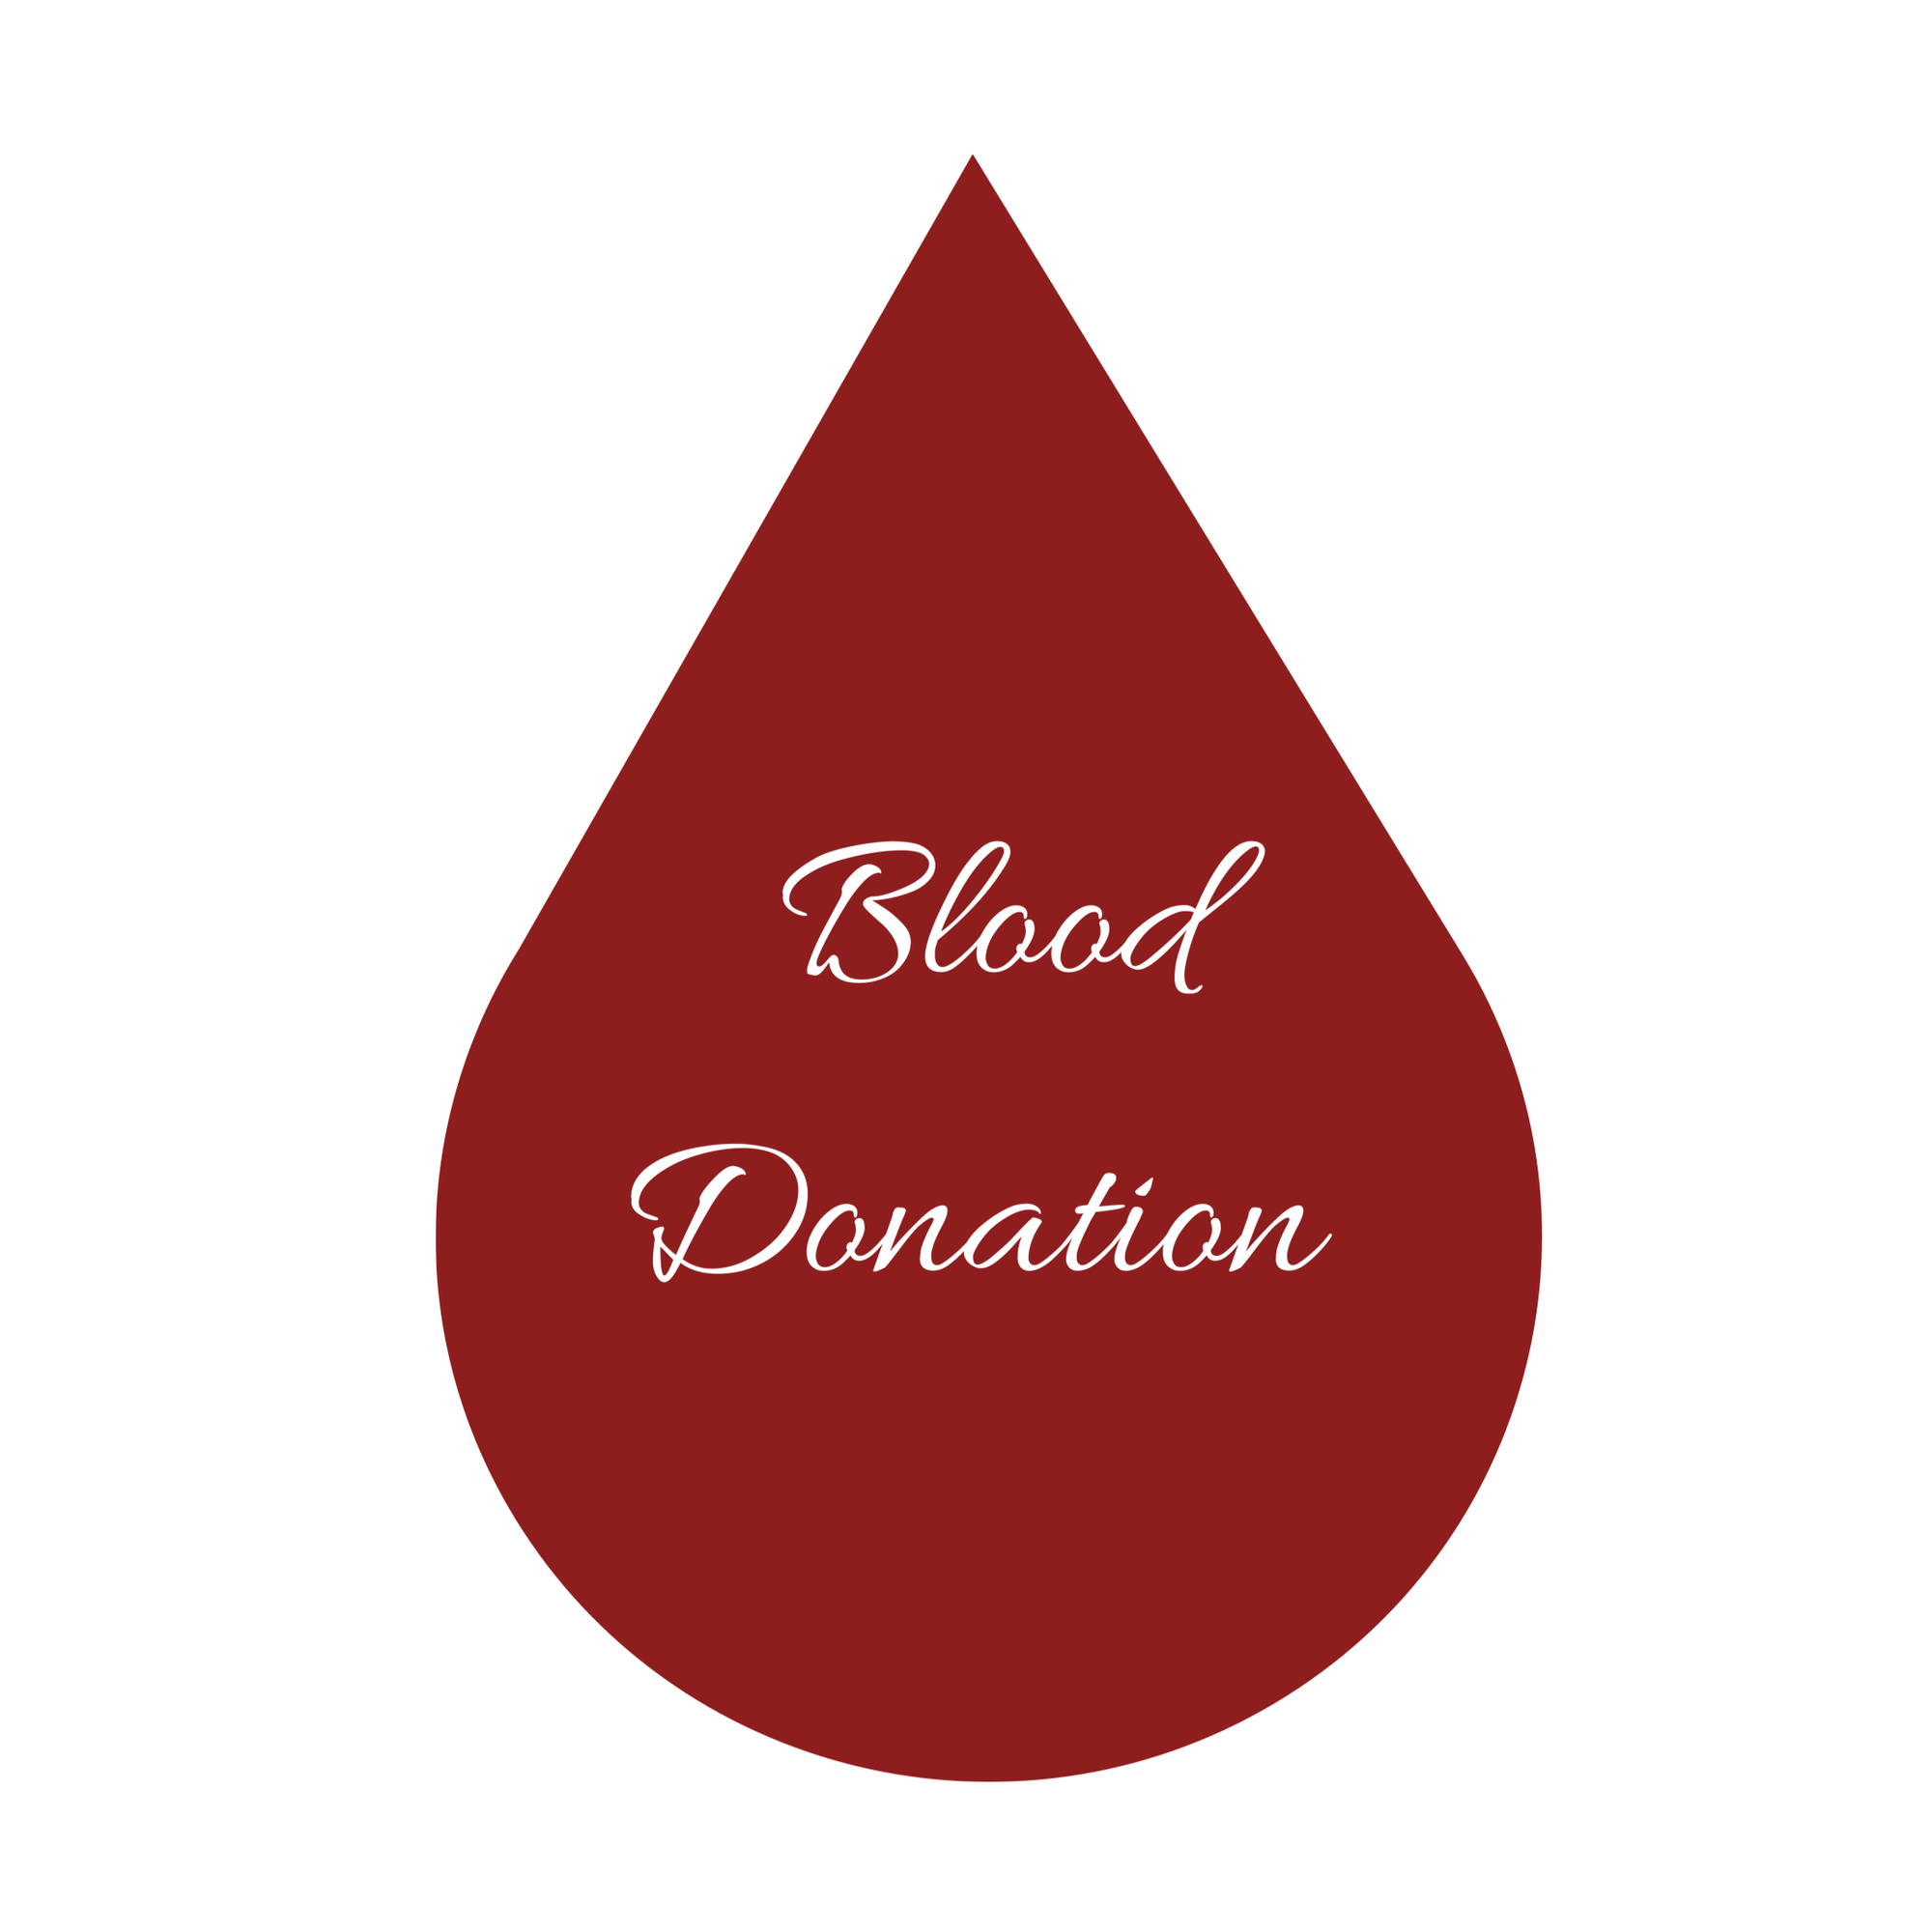 Have you donated blood before?